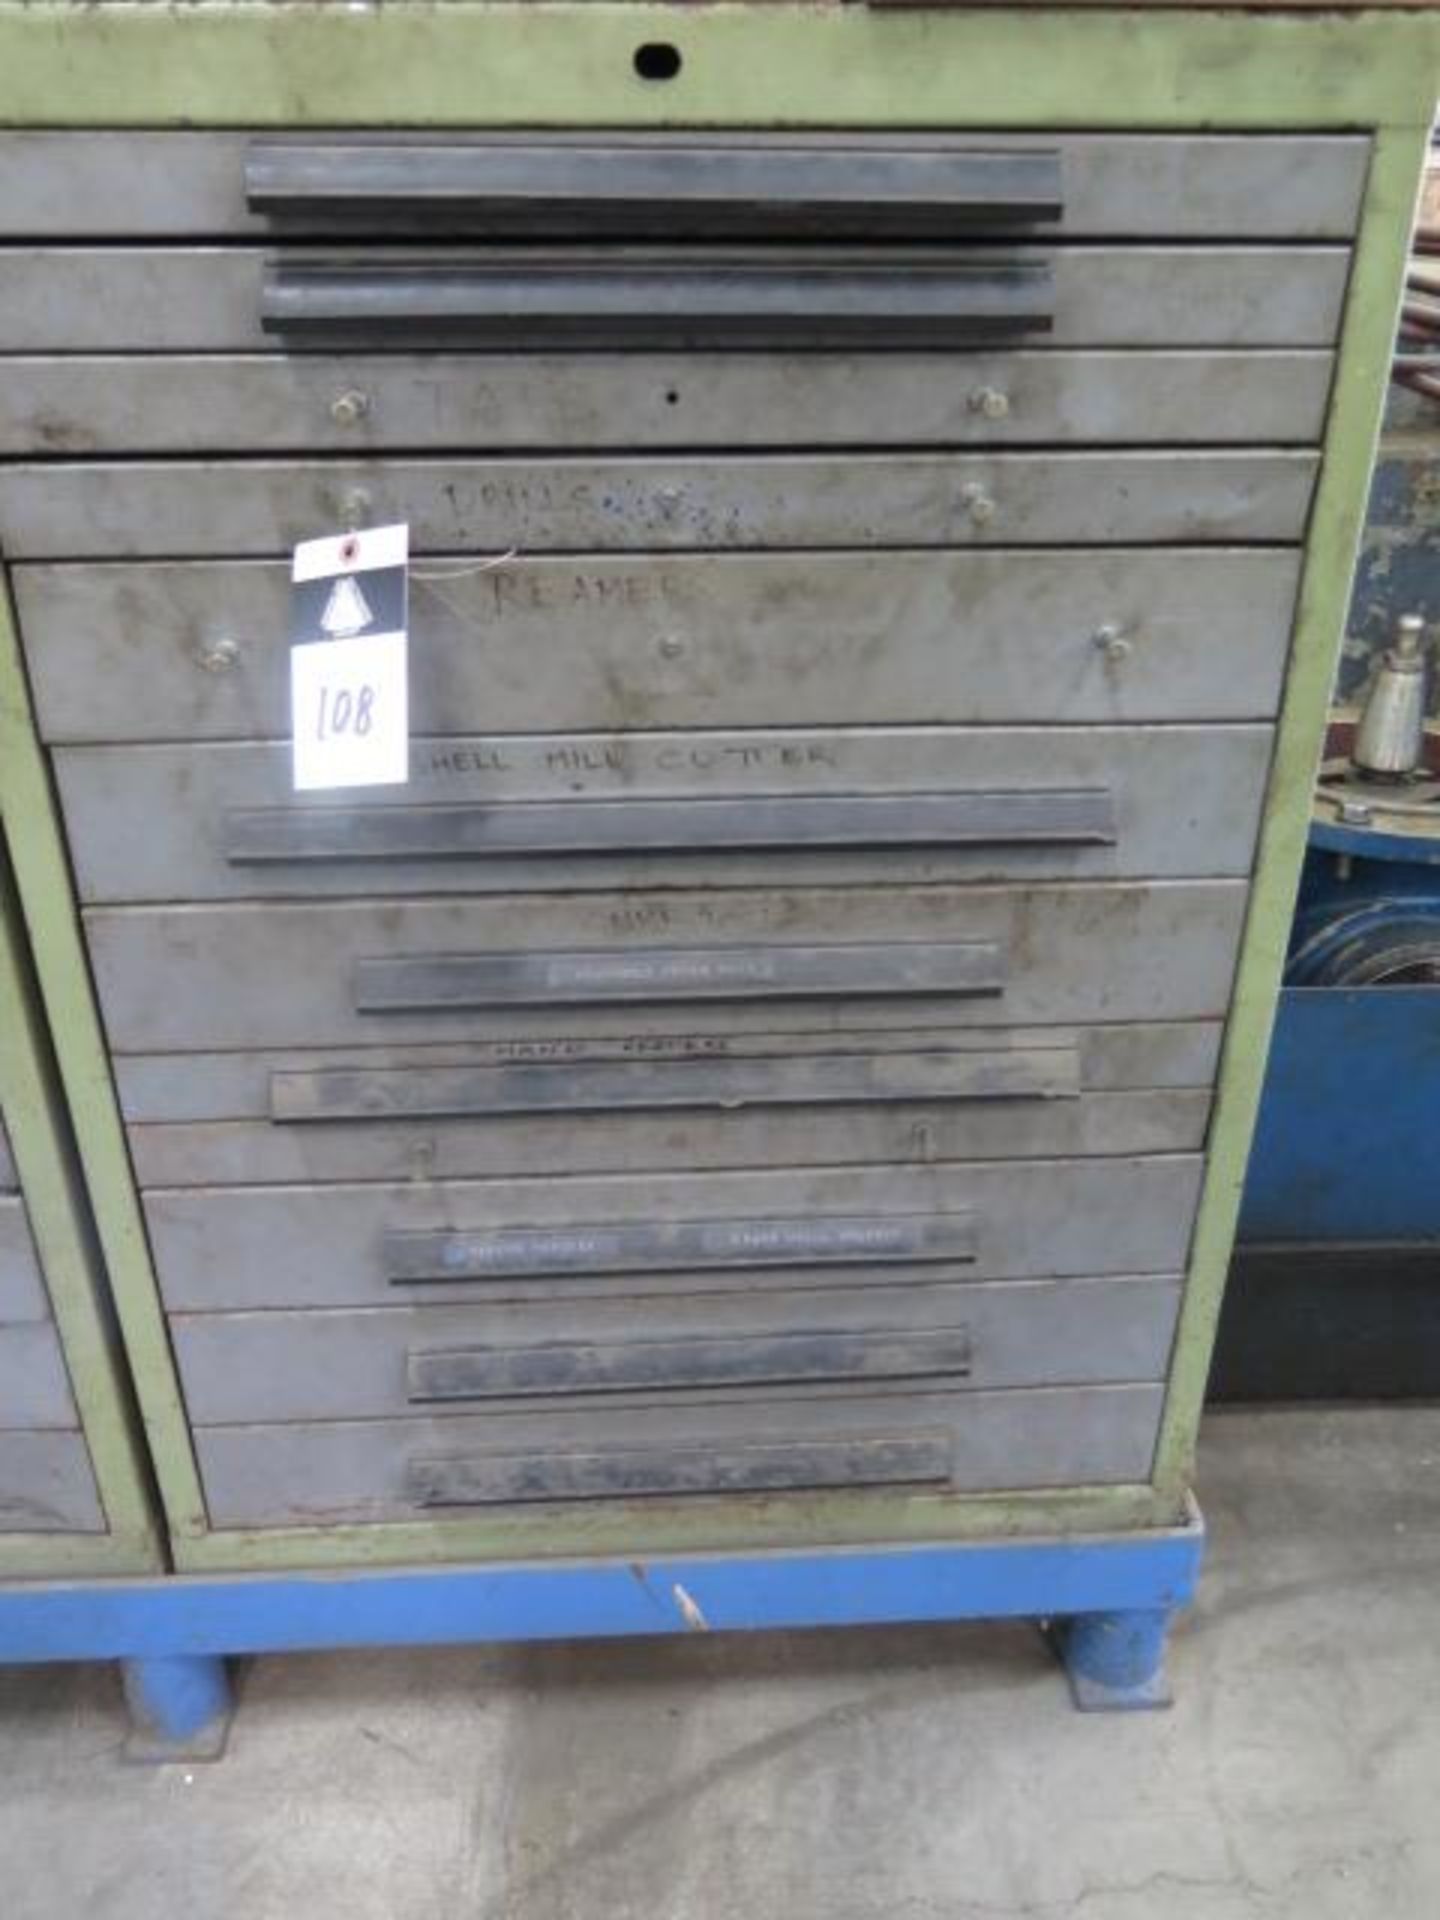 Bott 12-Drawer Tooling Cabinet w/ Endmills, Taps, Drills, Reamers, Spade Drill Bits (SOLD AS-IS - NO